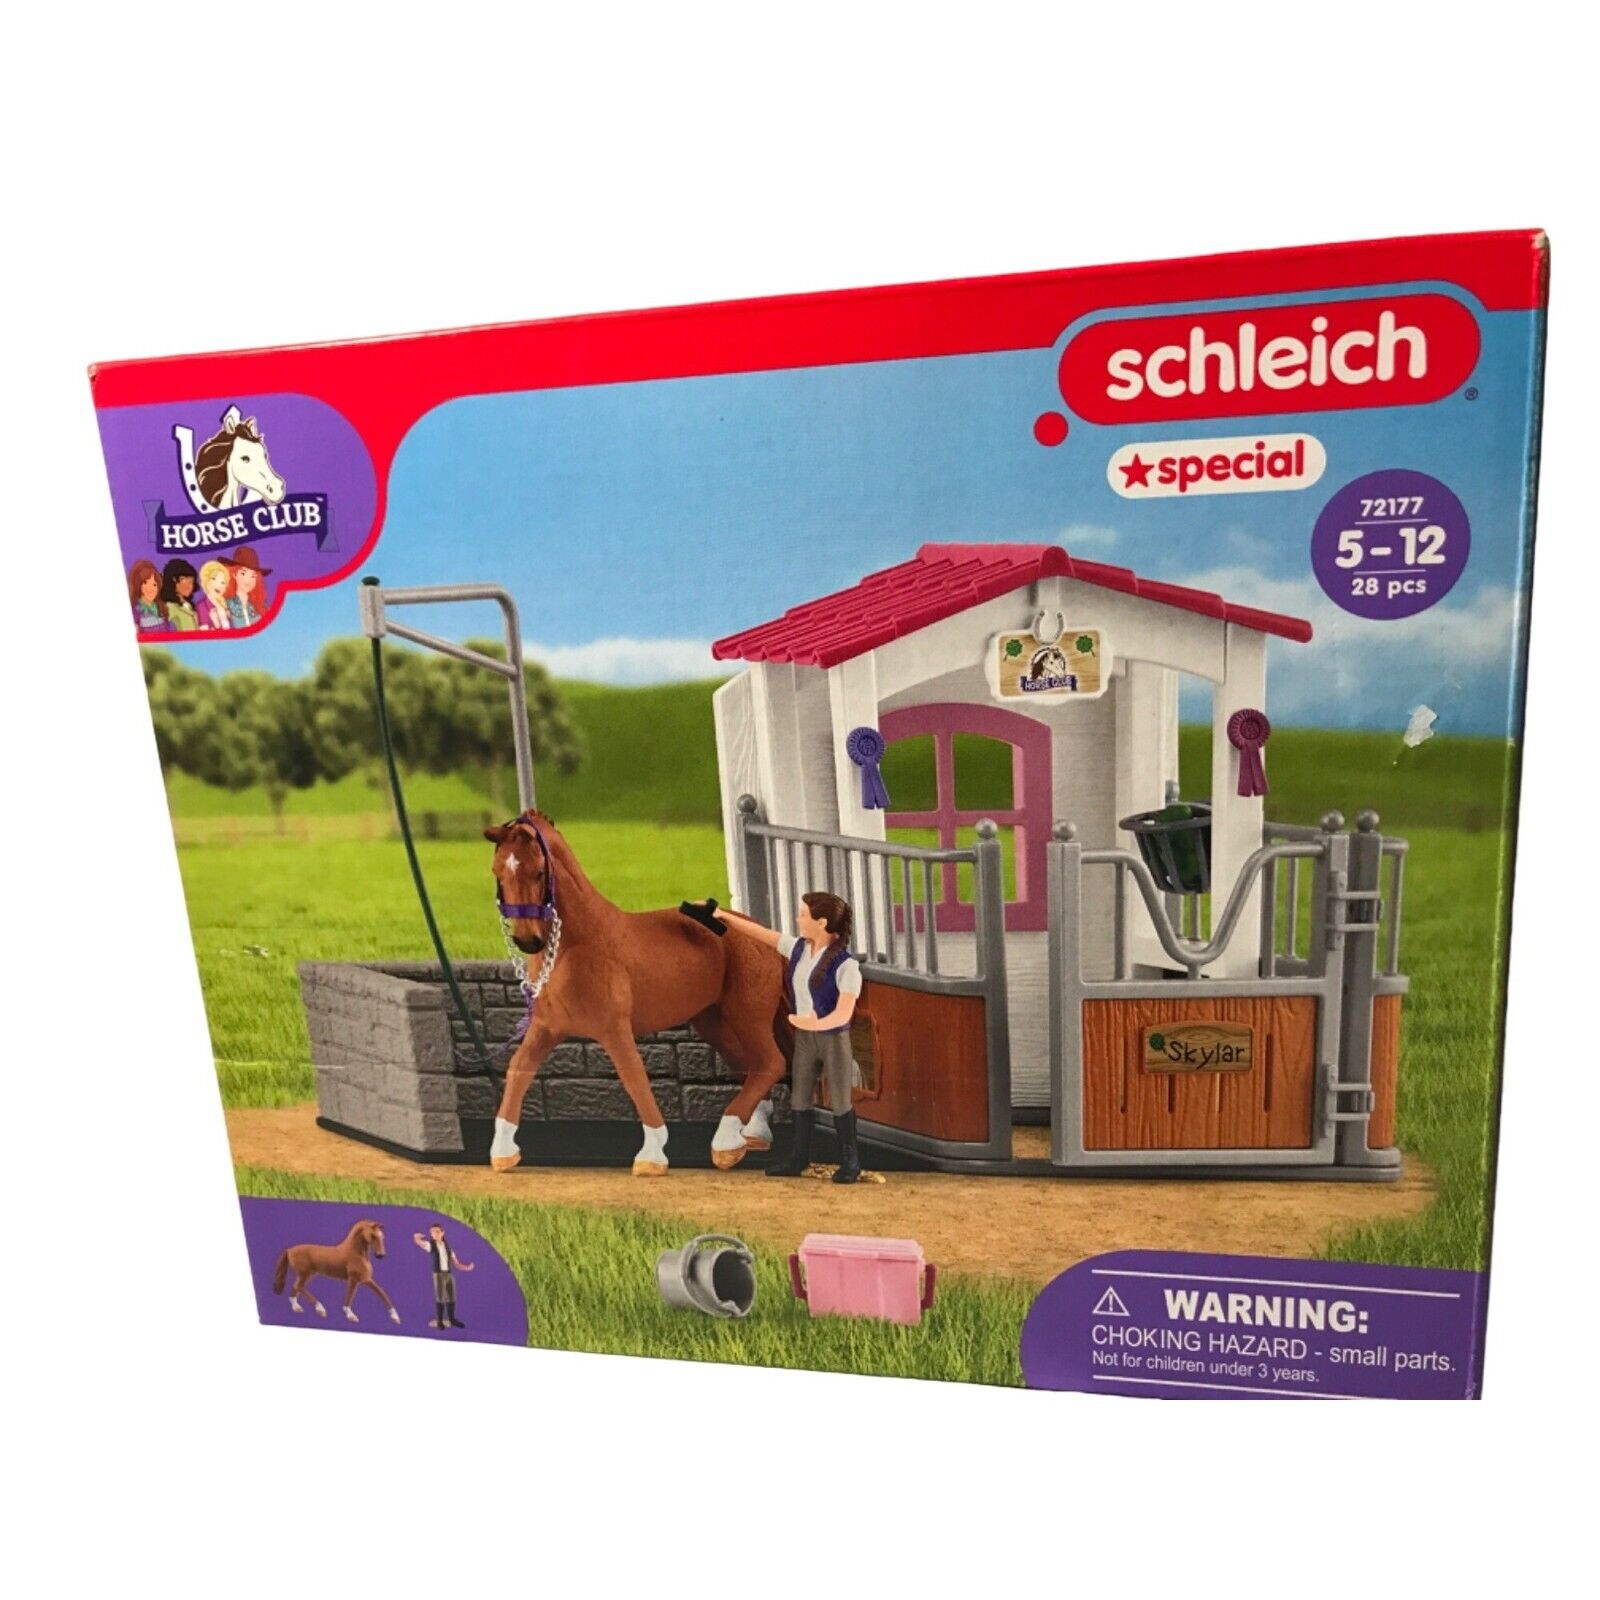 SCHLEICH HORSE CLUB Special Horse Wash Station with Stall 72177 TOY Ages 5-12